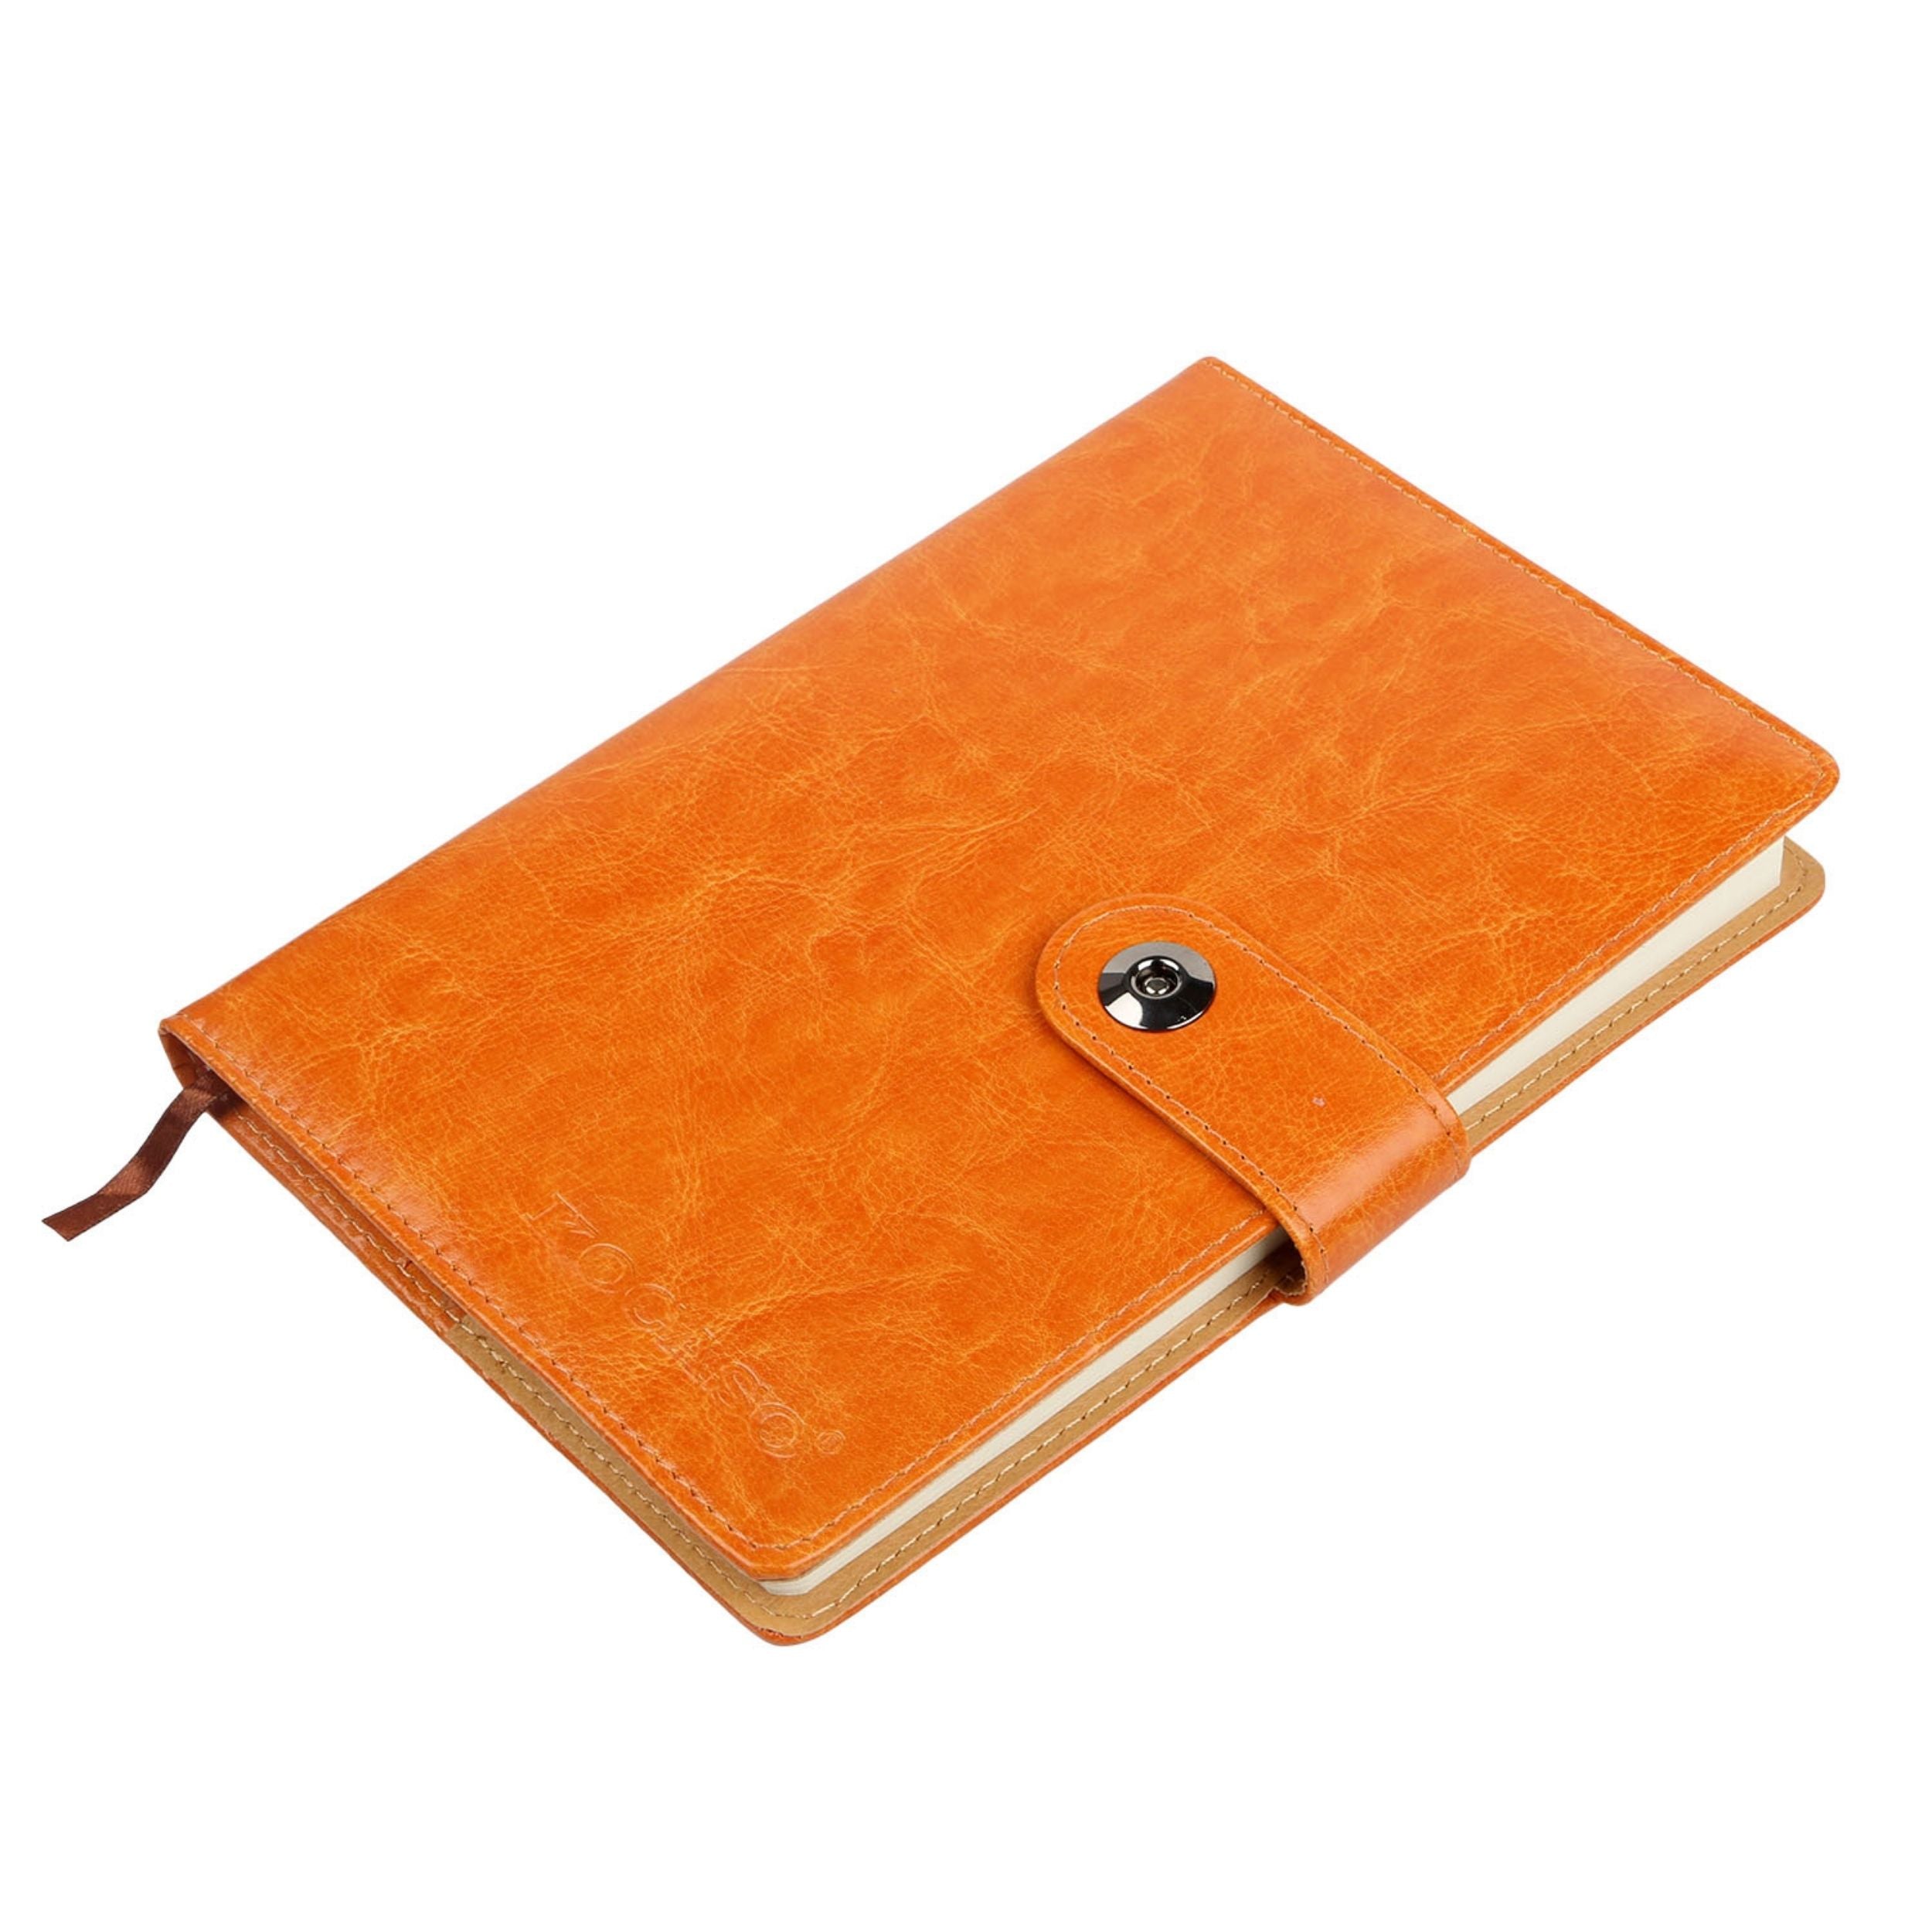 FRESH FAB FINDS 150 Pages PU Leather Cover Notebook with Calendar, World Map, and Silk Ribbon